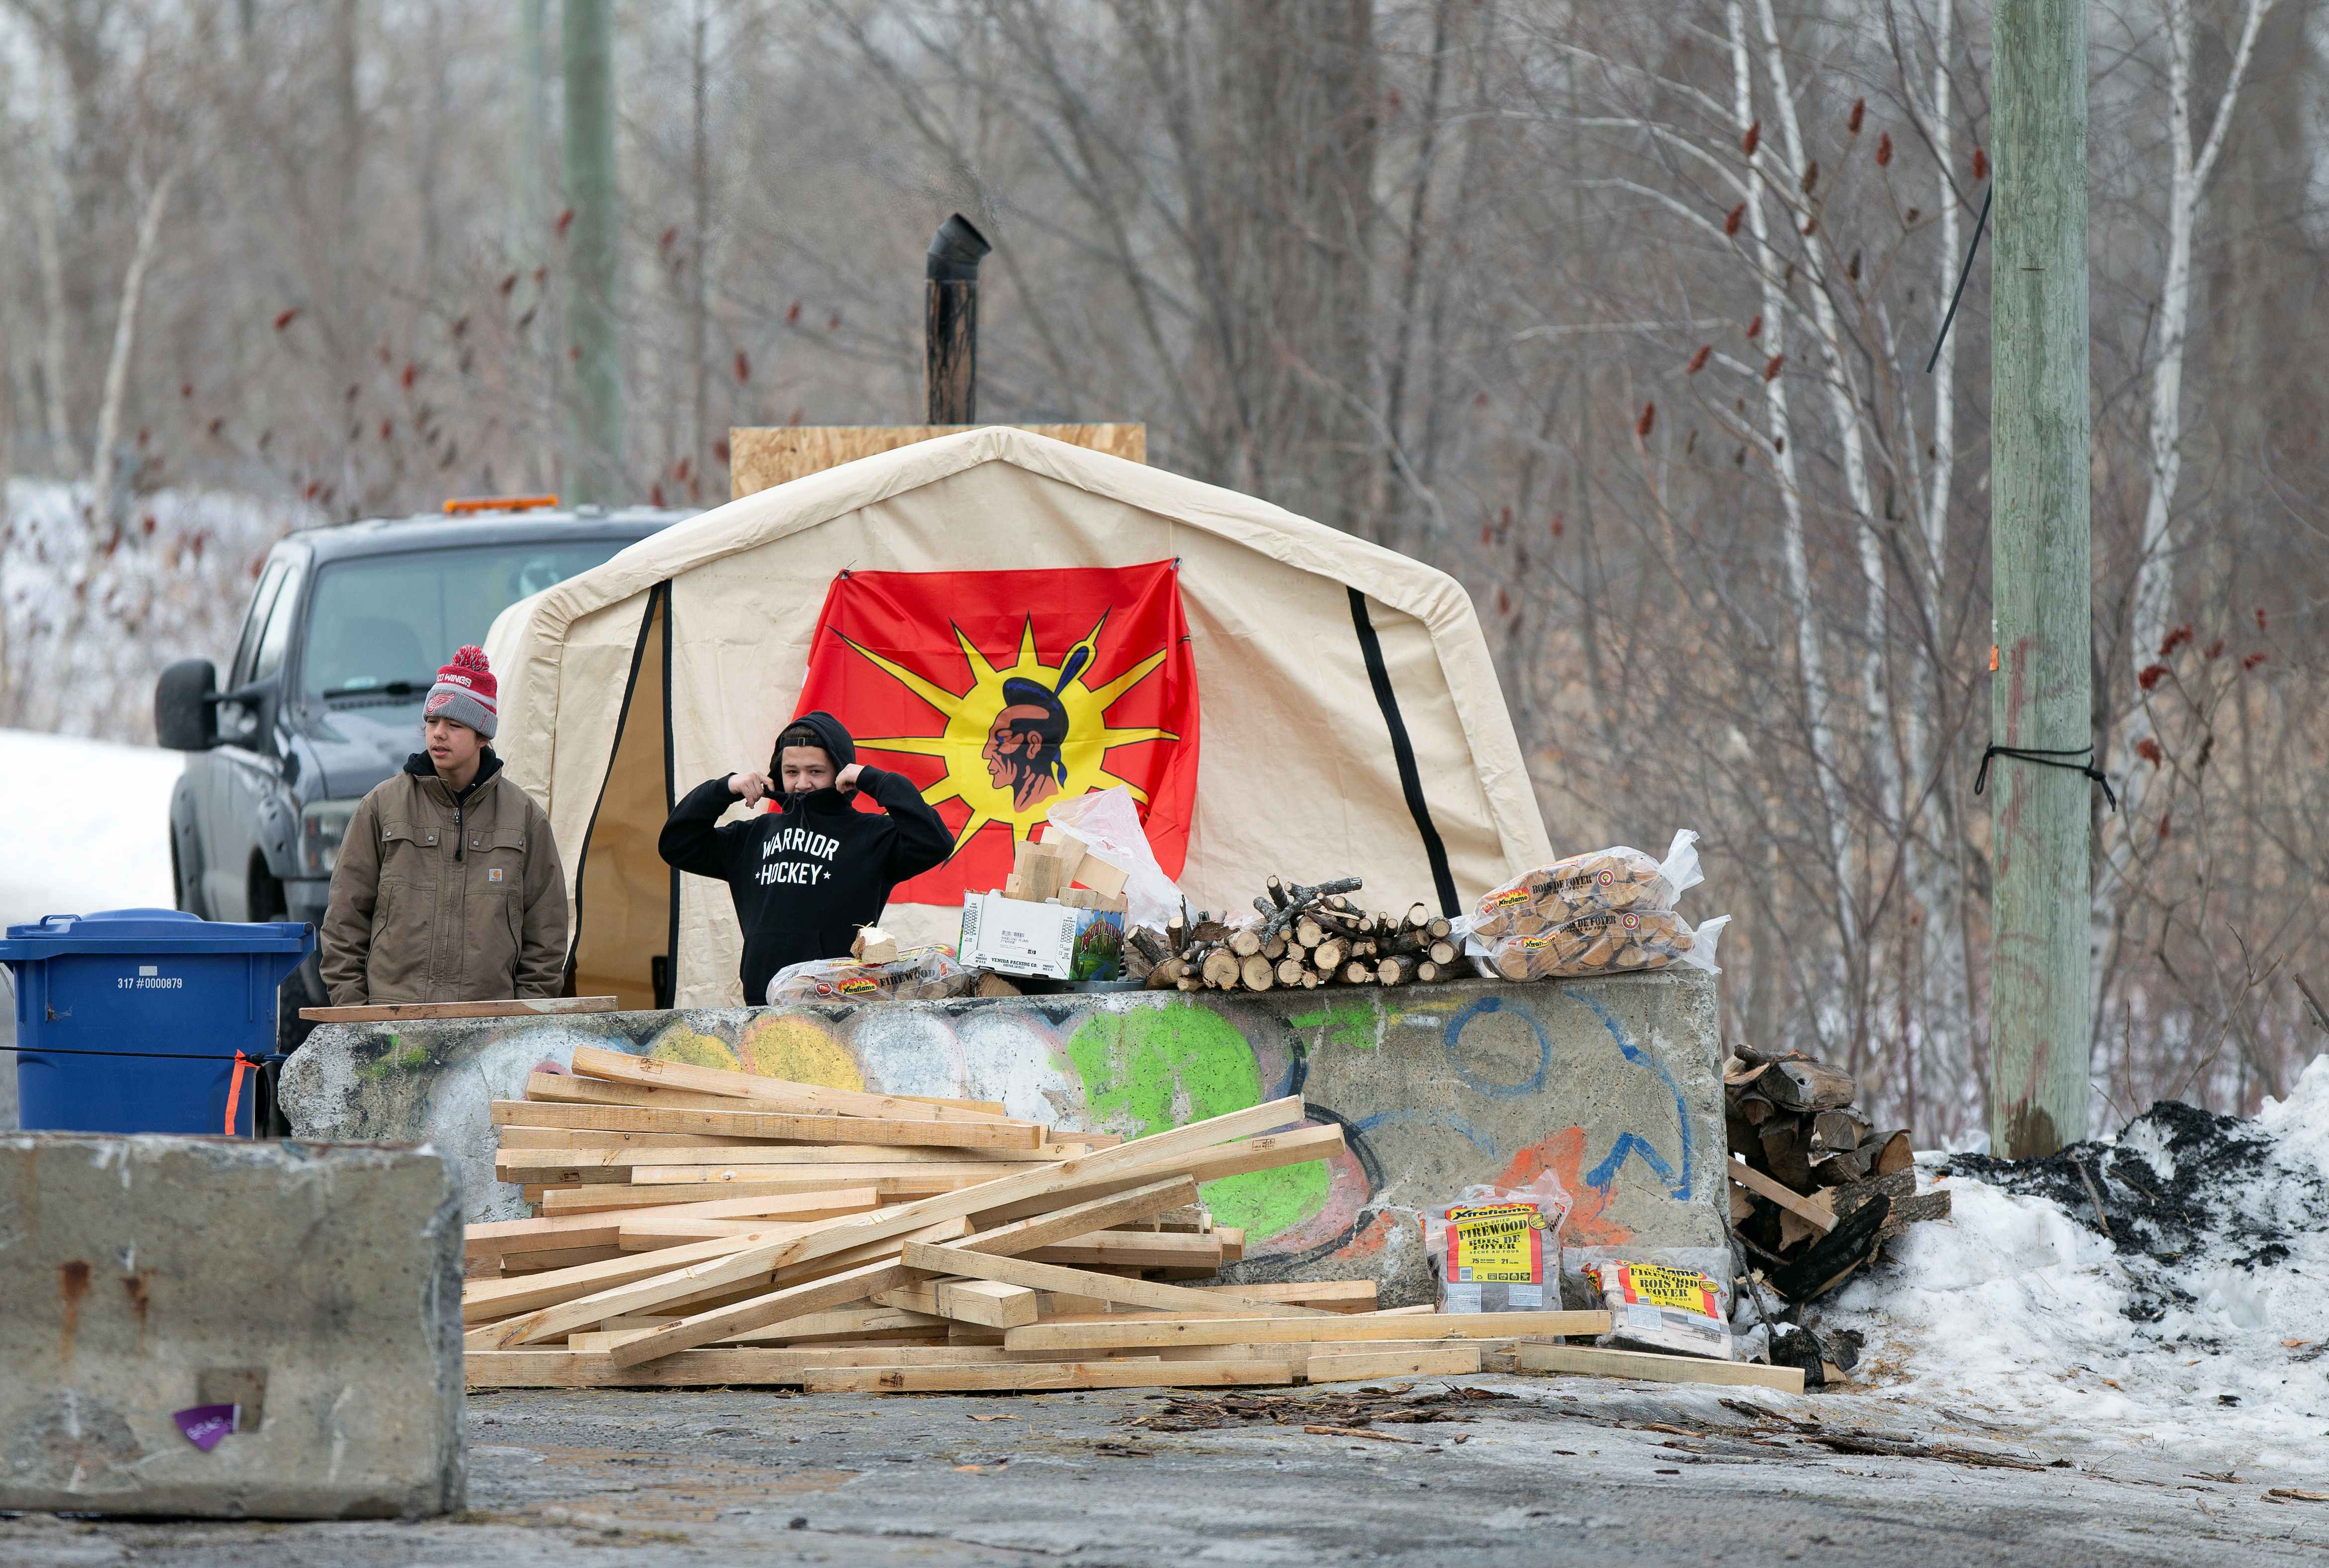 Protestors stand by a blockade closing a road in Kahnawake Mohawk Territory, south of Montreal, Quebec, Canada Feb. 25, 2020. REUTERS/Christinne Muschi